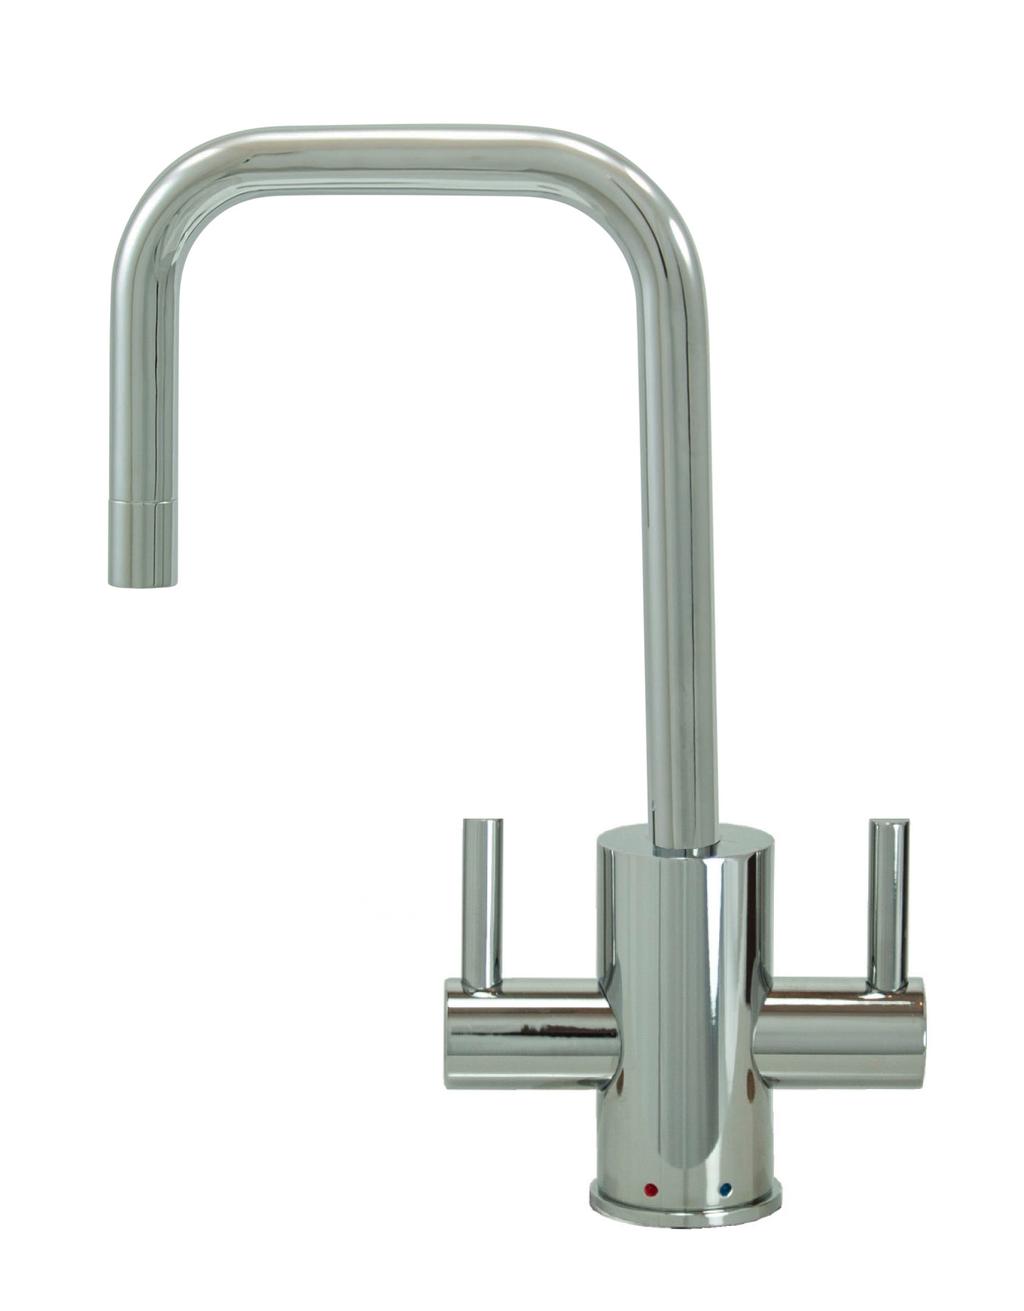 Hot & Cold Water Faucet with Contemporary Round Body & Handles (90 Spout) MT1831-NL These Lead Free faucets are only compatible with The Little Gourmet heating tank (MT641-3) 1-3/16 minimum to 1-3/